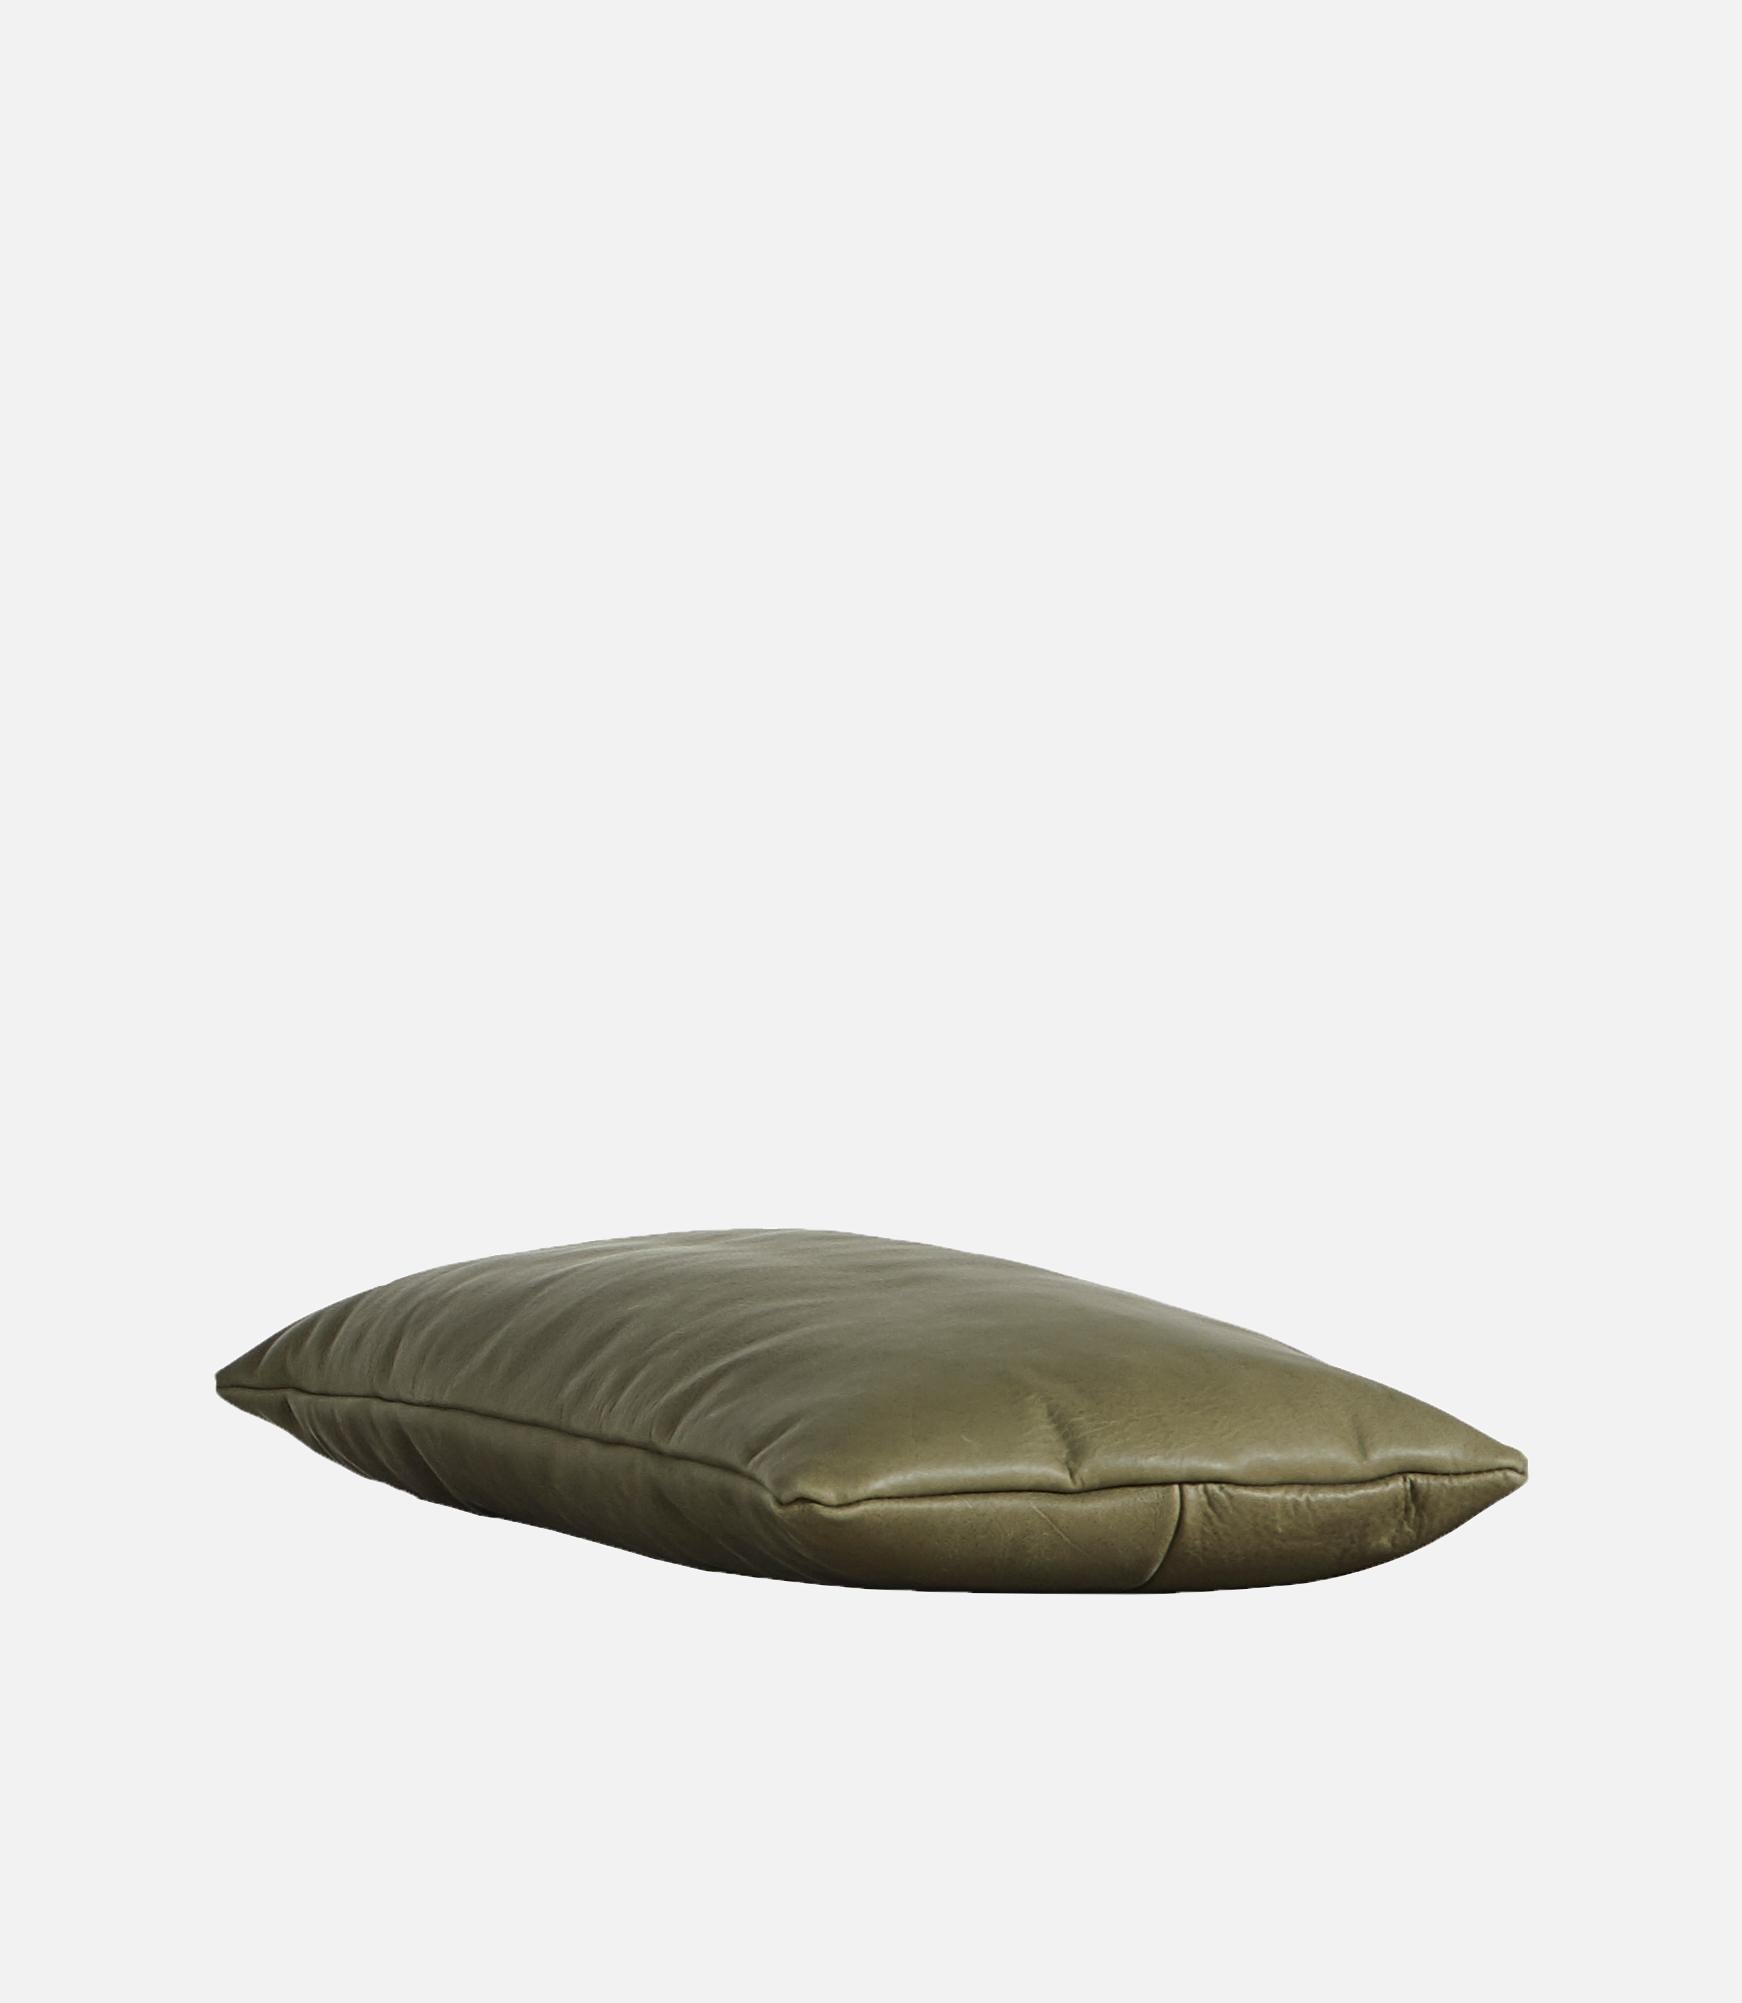 Danish Cognac Leather Level Pillow by Msds Studio For Sale